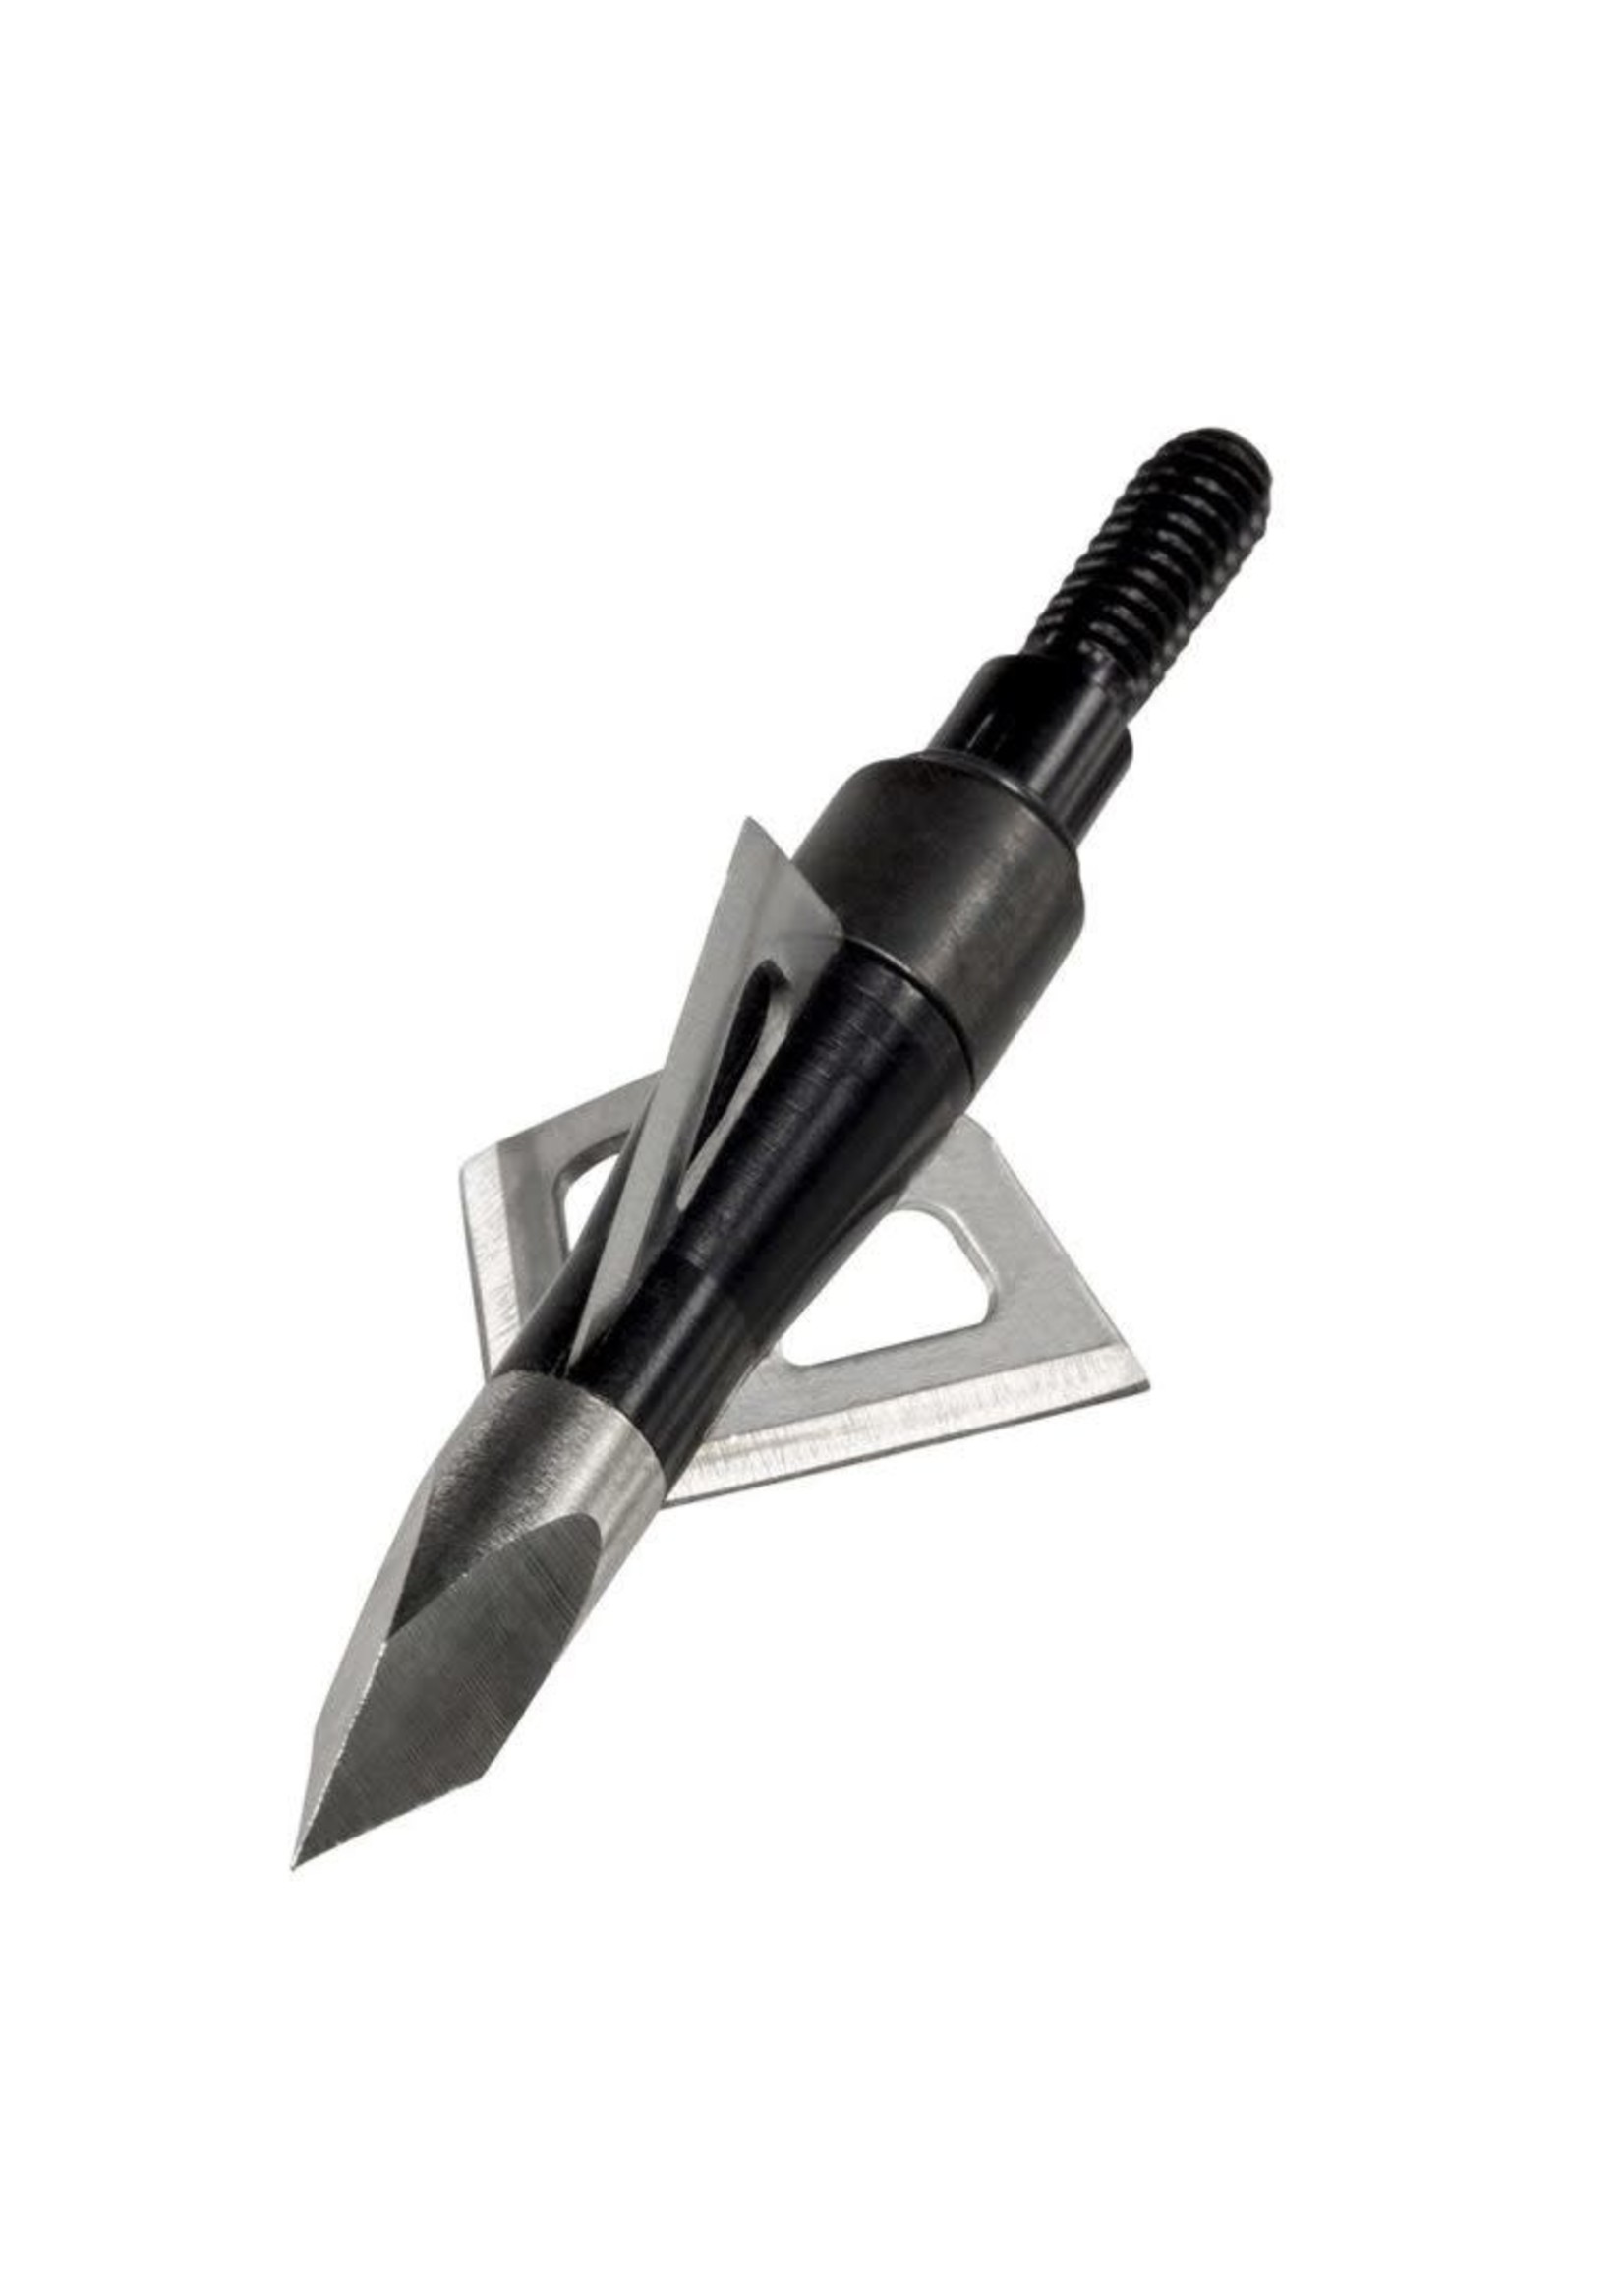 Wasp Bullet 3 fixed broadhead 1" cutting diameter 0.027 Stainless steel Blades - 3 pack